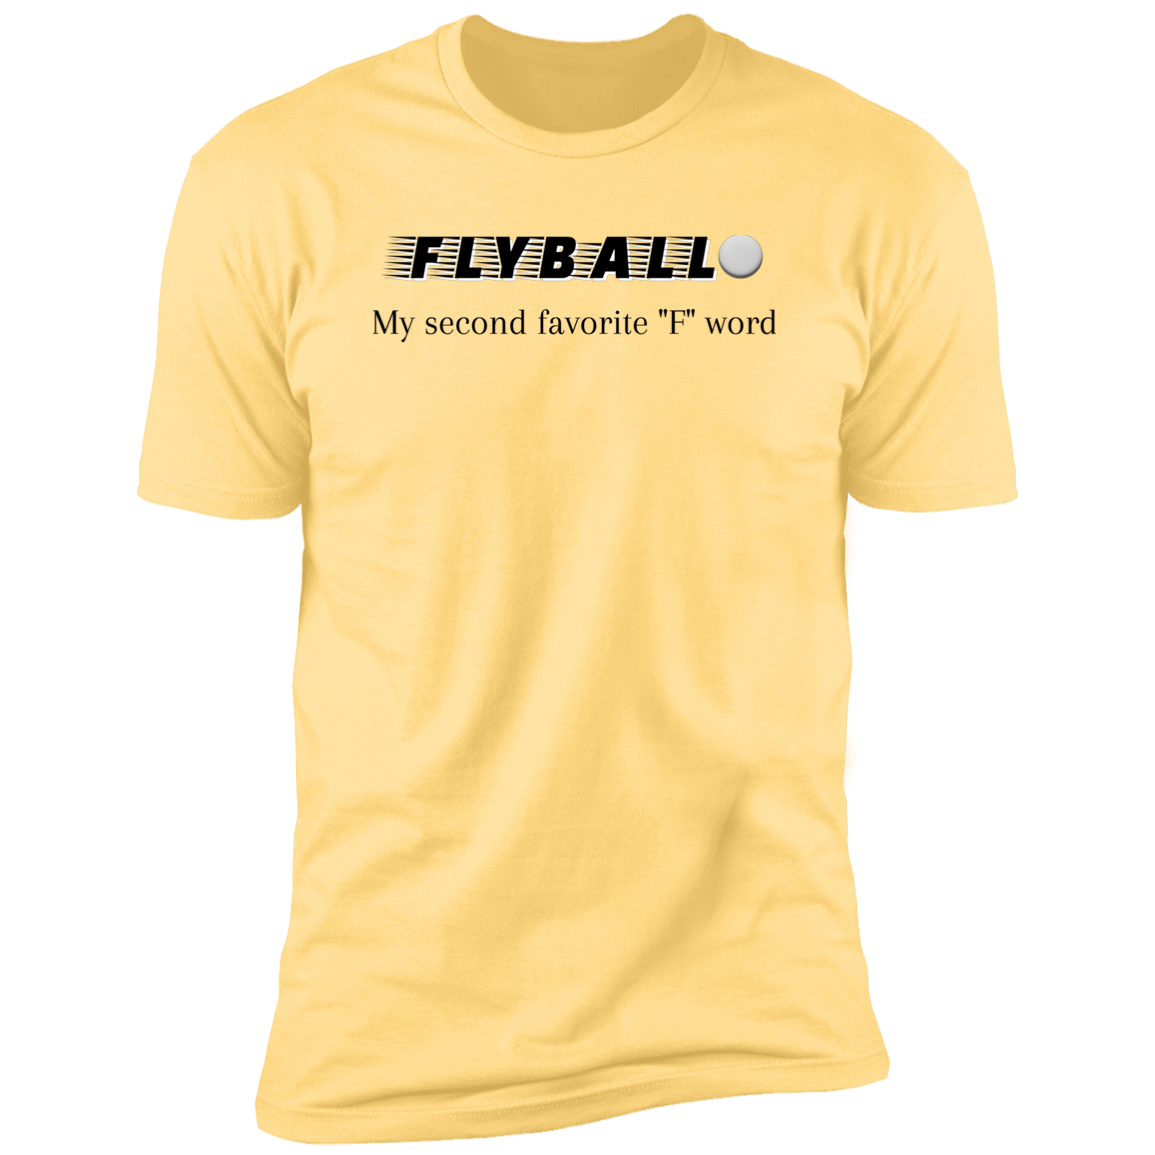 Flyball My second favorite 'f' word flyball t-shirt, dog shirt for humans, sporting dog shirt, in banana cream